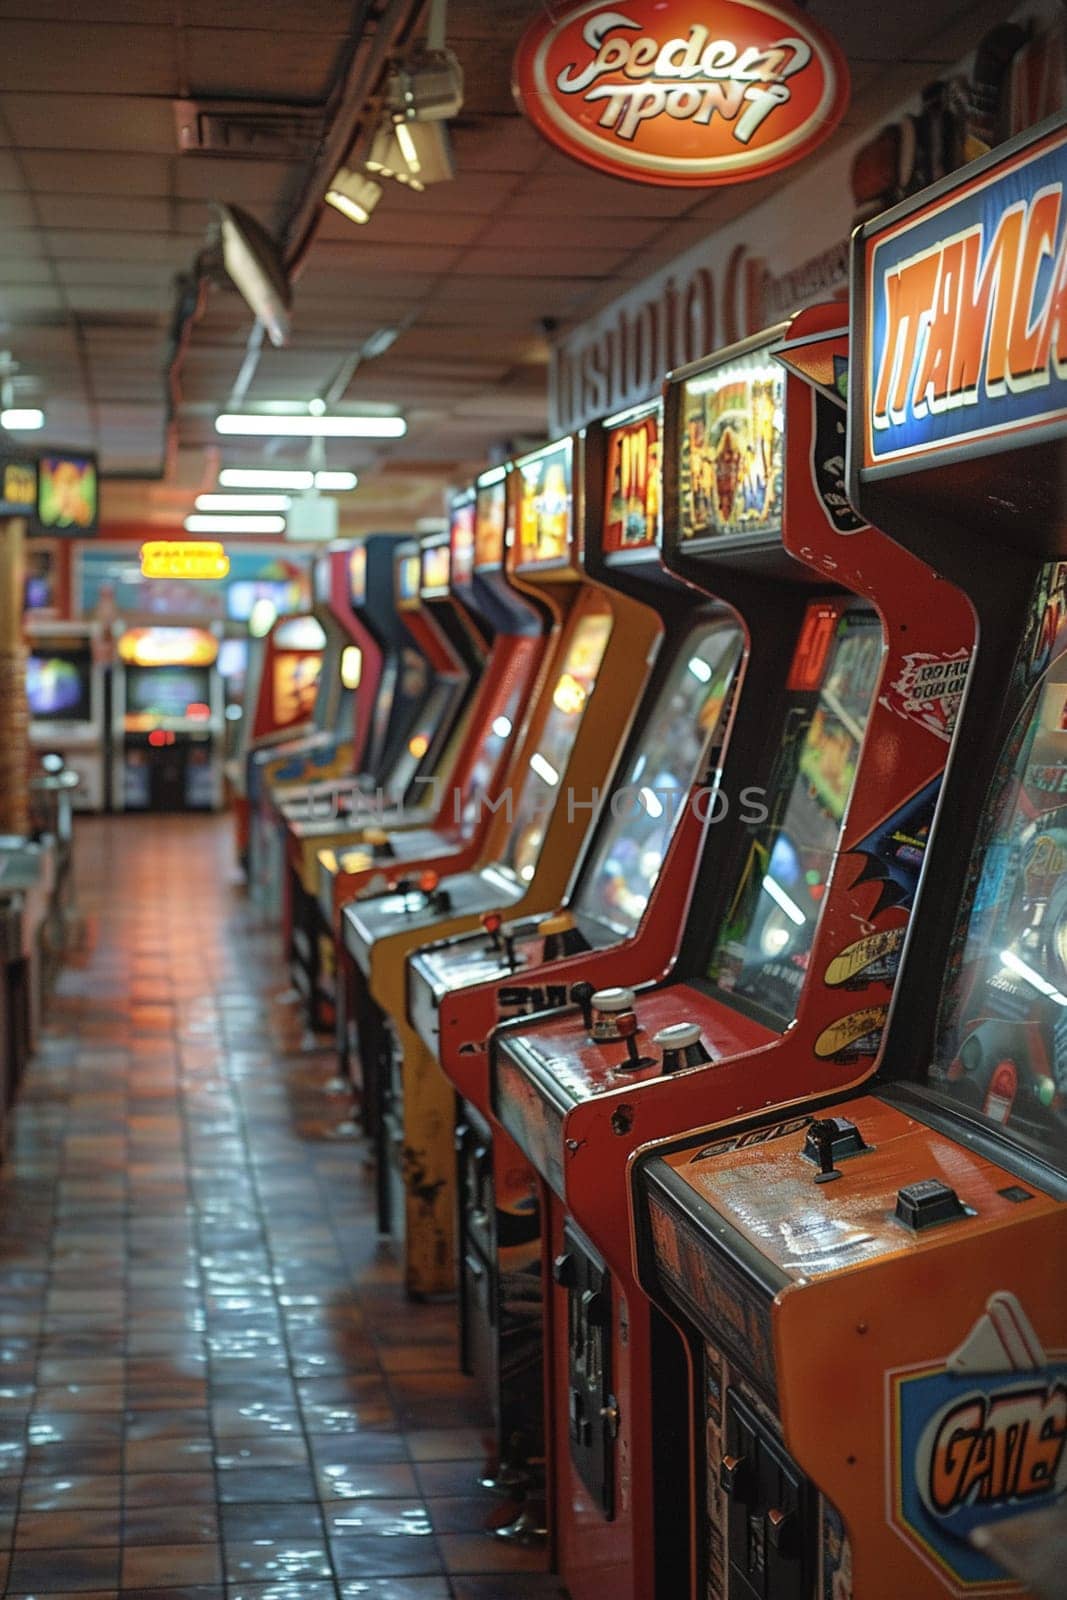 Classic Arcade Machines Replay Childhood in Business of Nostalgic Gaming, Arcade screens and pixelated graphics replay a story of childhood fun and games in the classic arcade machine business.